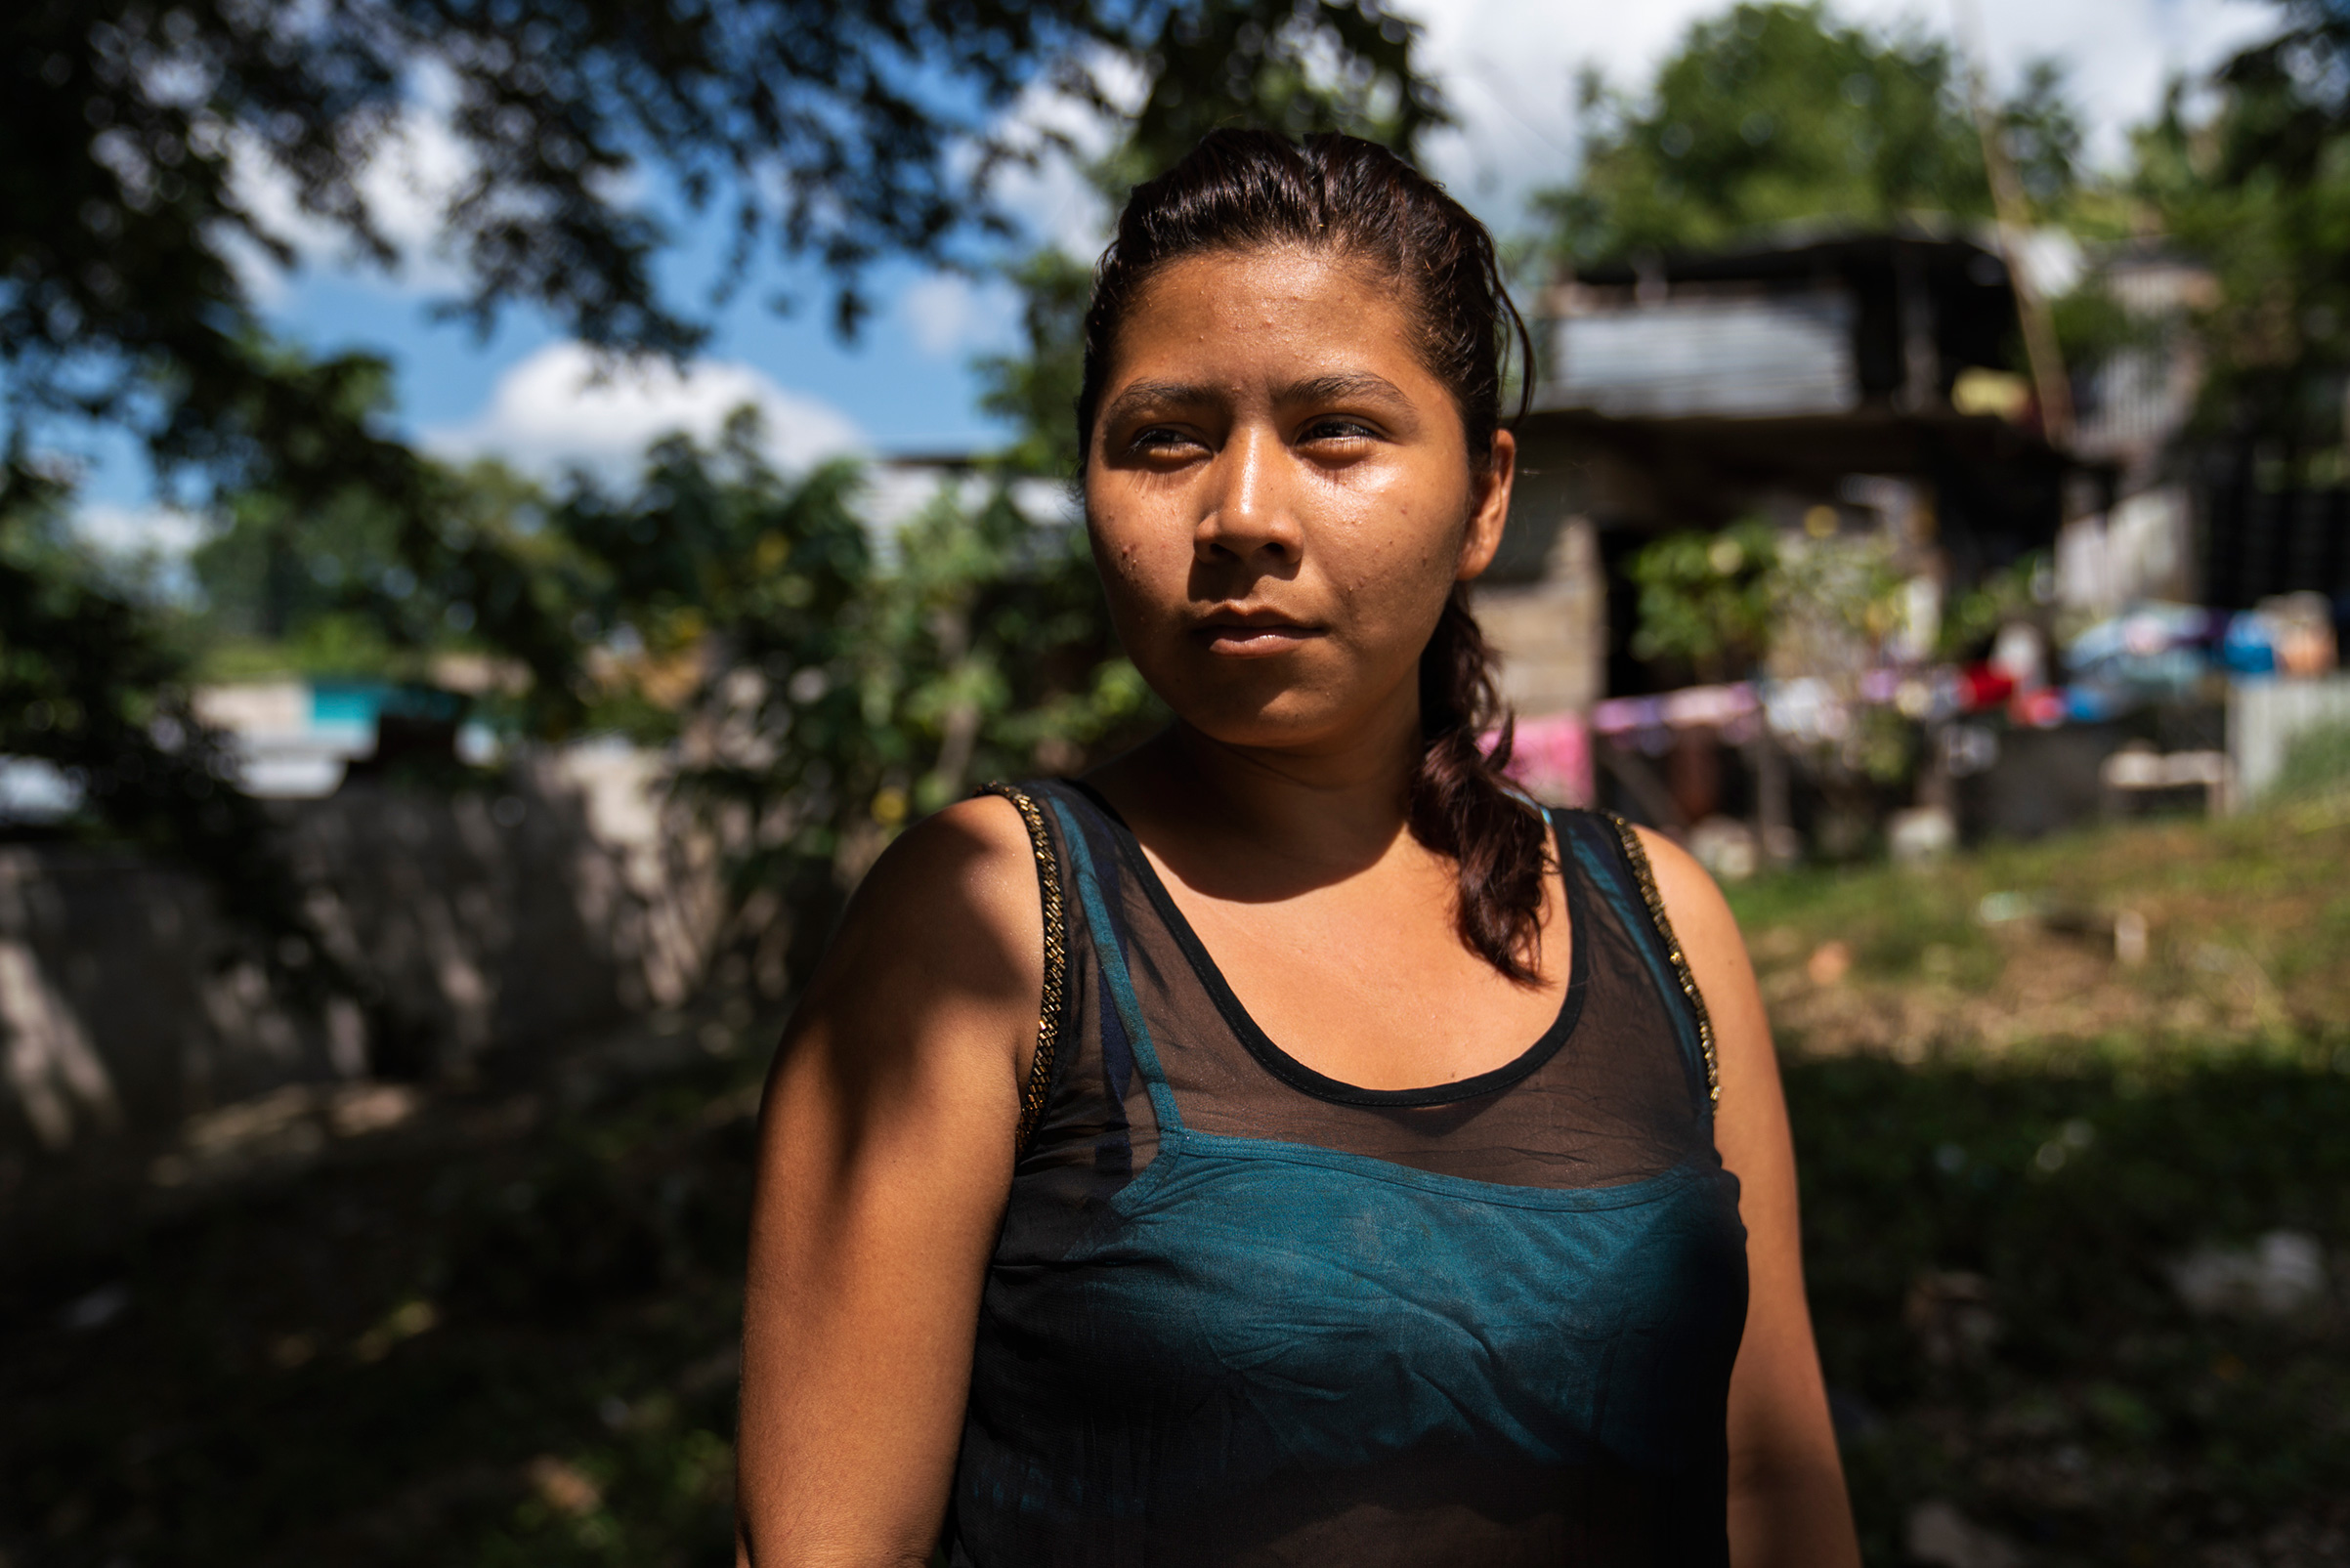 Honduran migrant Norma Leticia López, 21, on Oct. 26, in front of the a migrant shelter near Palenque, Chiapas. She left her country four days before leaving behind two kids. Norma used to work at a bakery and says she did not make enough money to support her children; she says she could only afford rice and beans. “I want for my kids to have a better life, an education," she adds. "A mother would do anything for her kids.” (Veronica G. Cardenas for TIME)